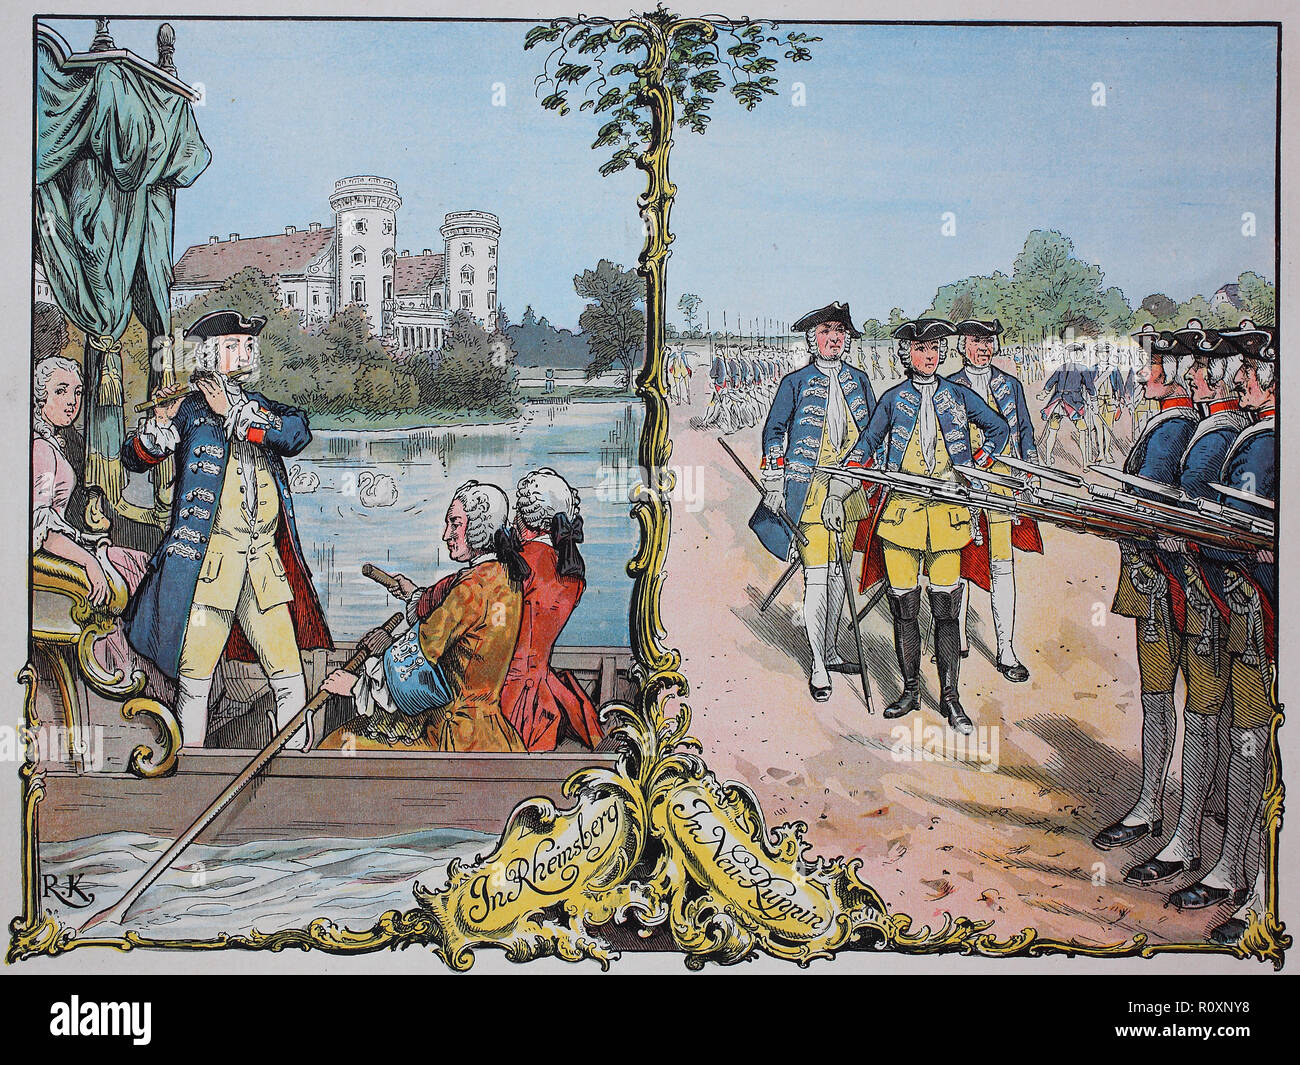 Digital improved reproduction, King Frederick the Great, Frederick II., Friedrich der Große, Friedrich II. 1712 - 1786 at Rheinsberg and Neu-Ruppin with the infantry Stock Photo